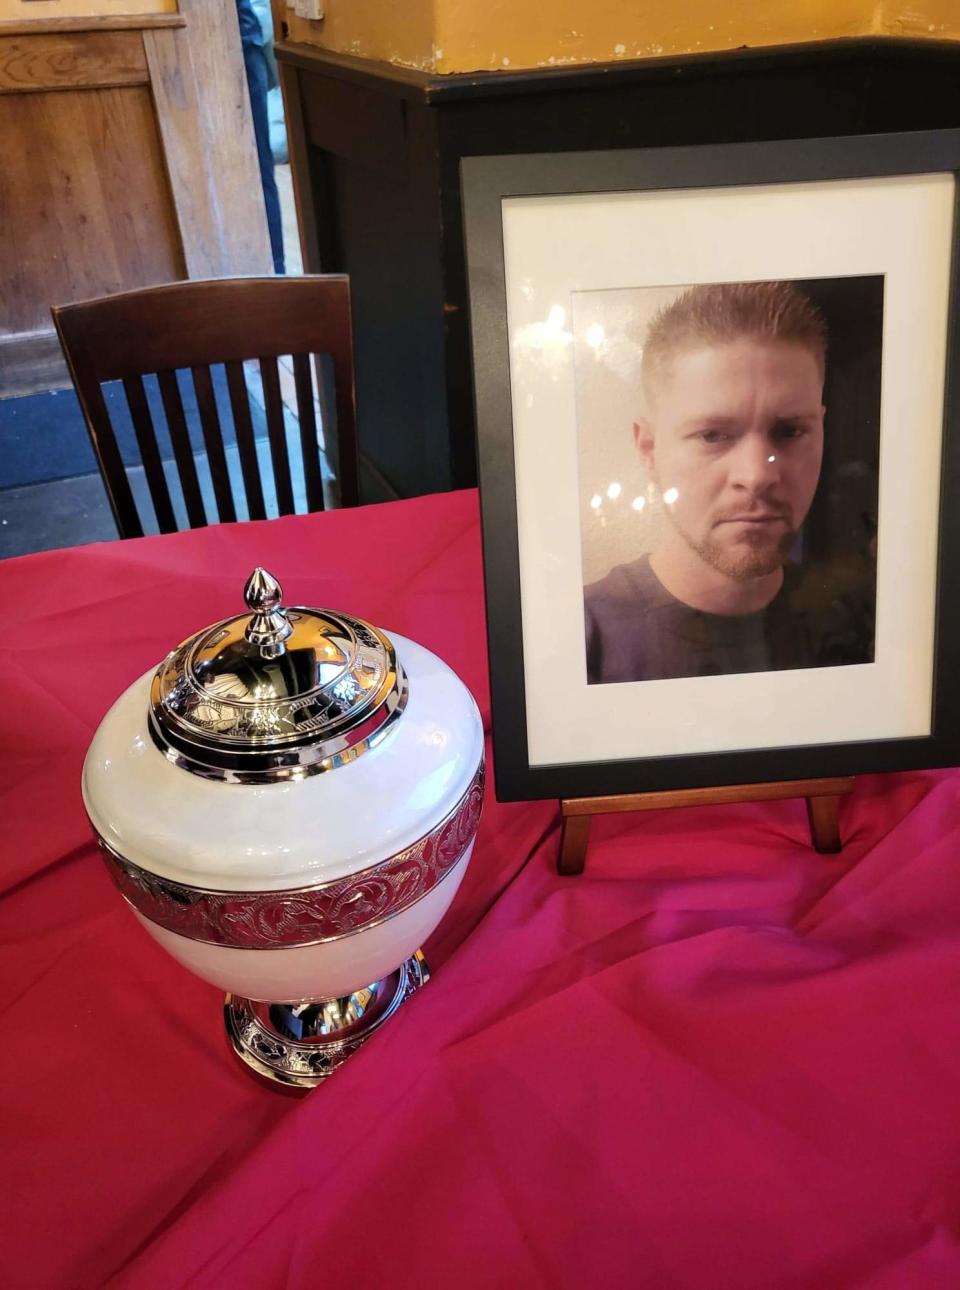 A photo of Richard Ward and an urn with his ashes can be seen on a table.